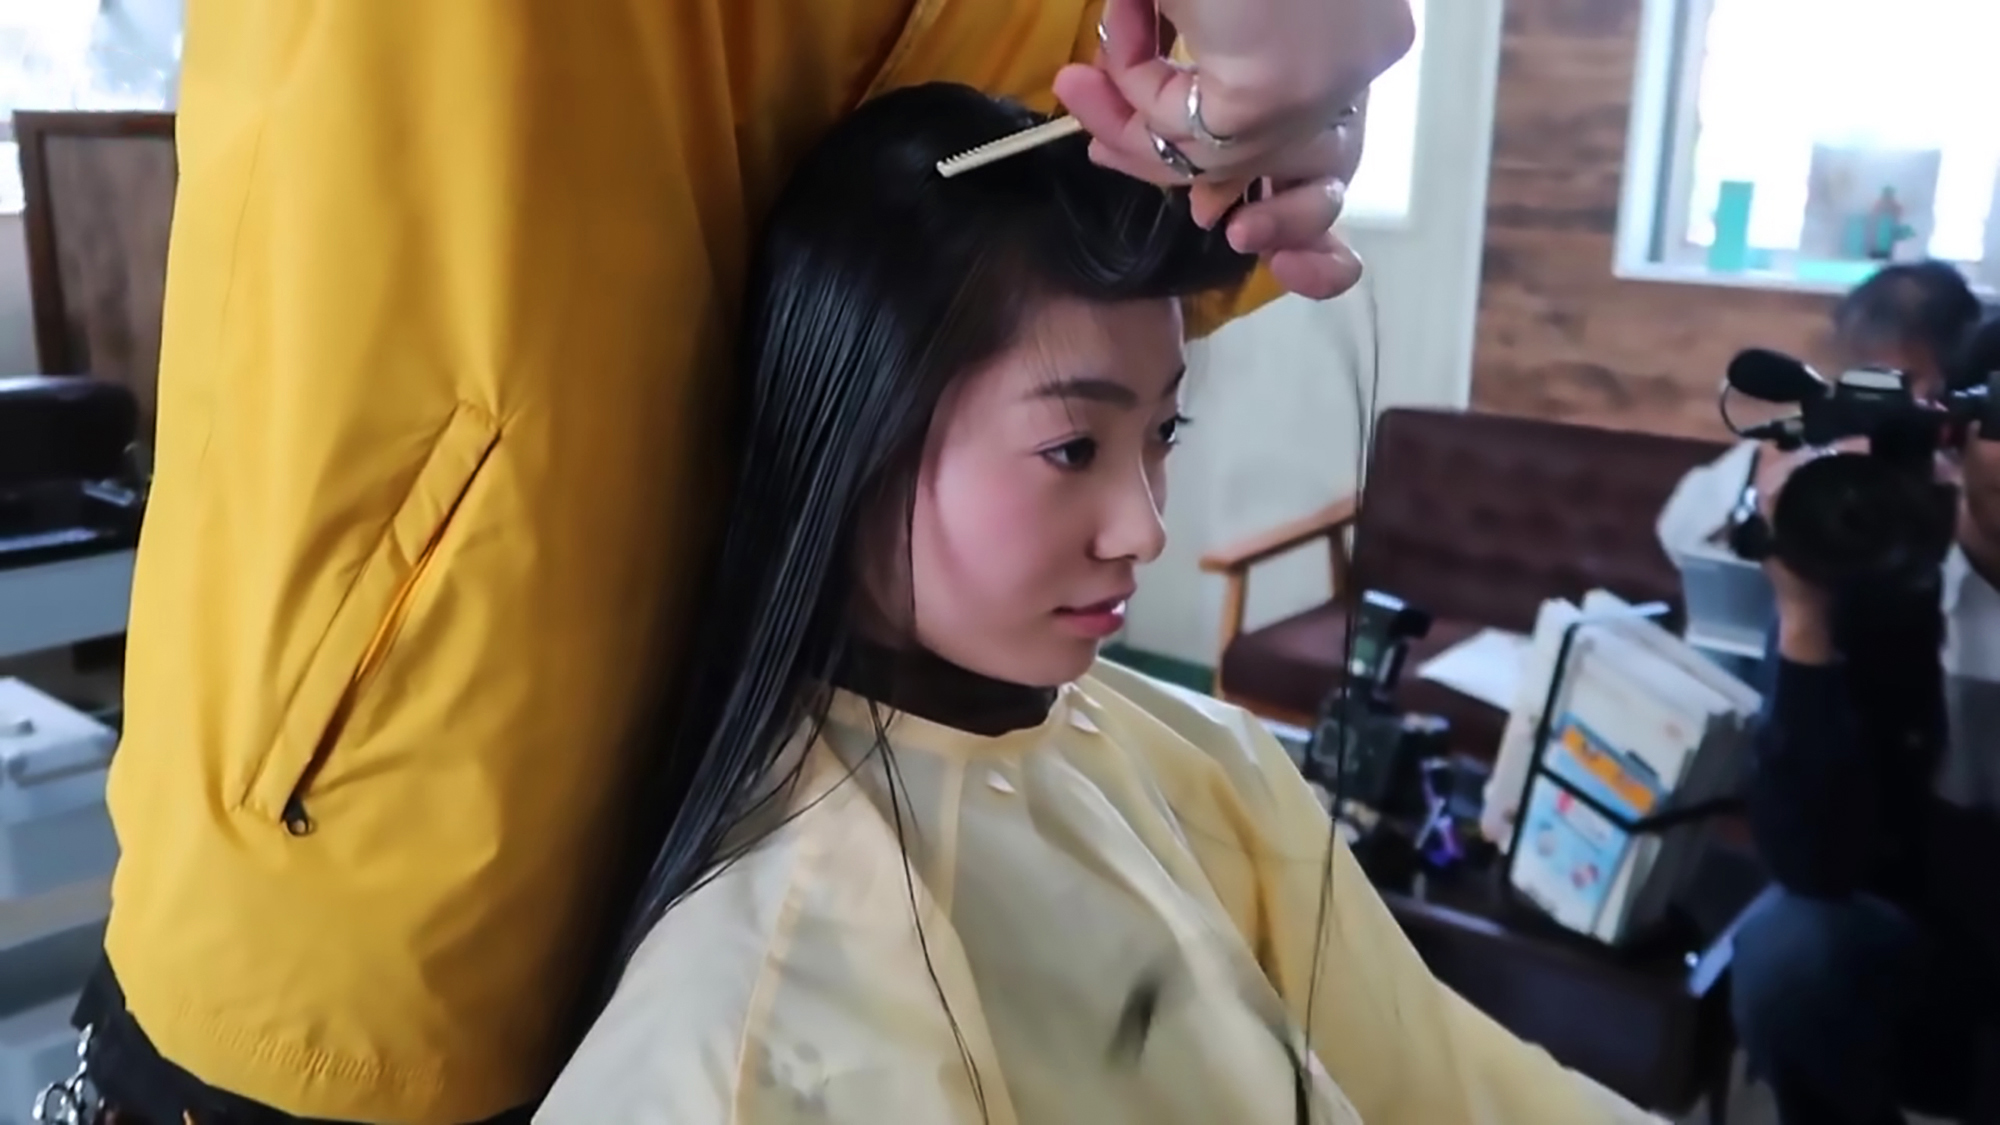 Izumi Haircut : Teen With Guinness Record For World Longest Hair Cuts ...